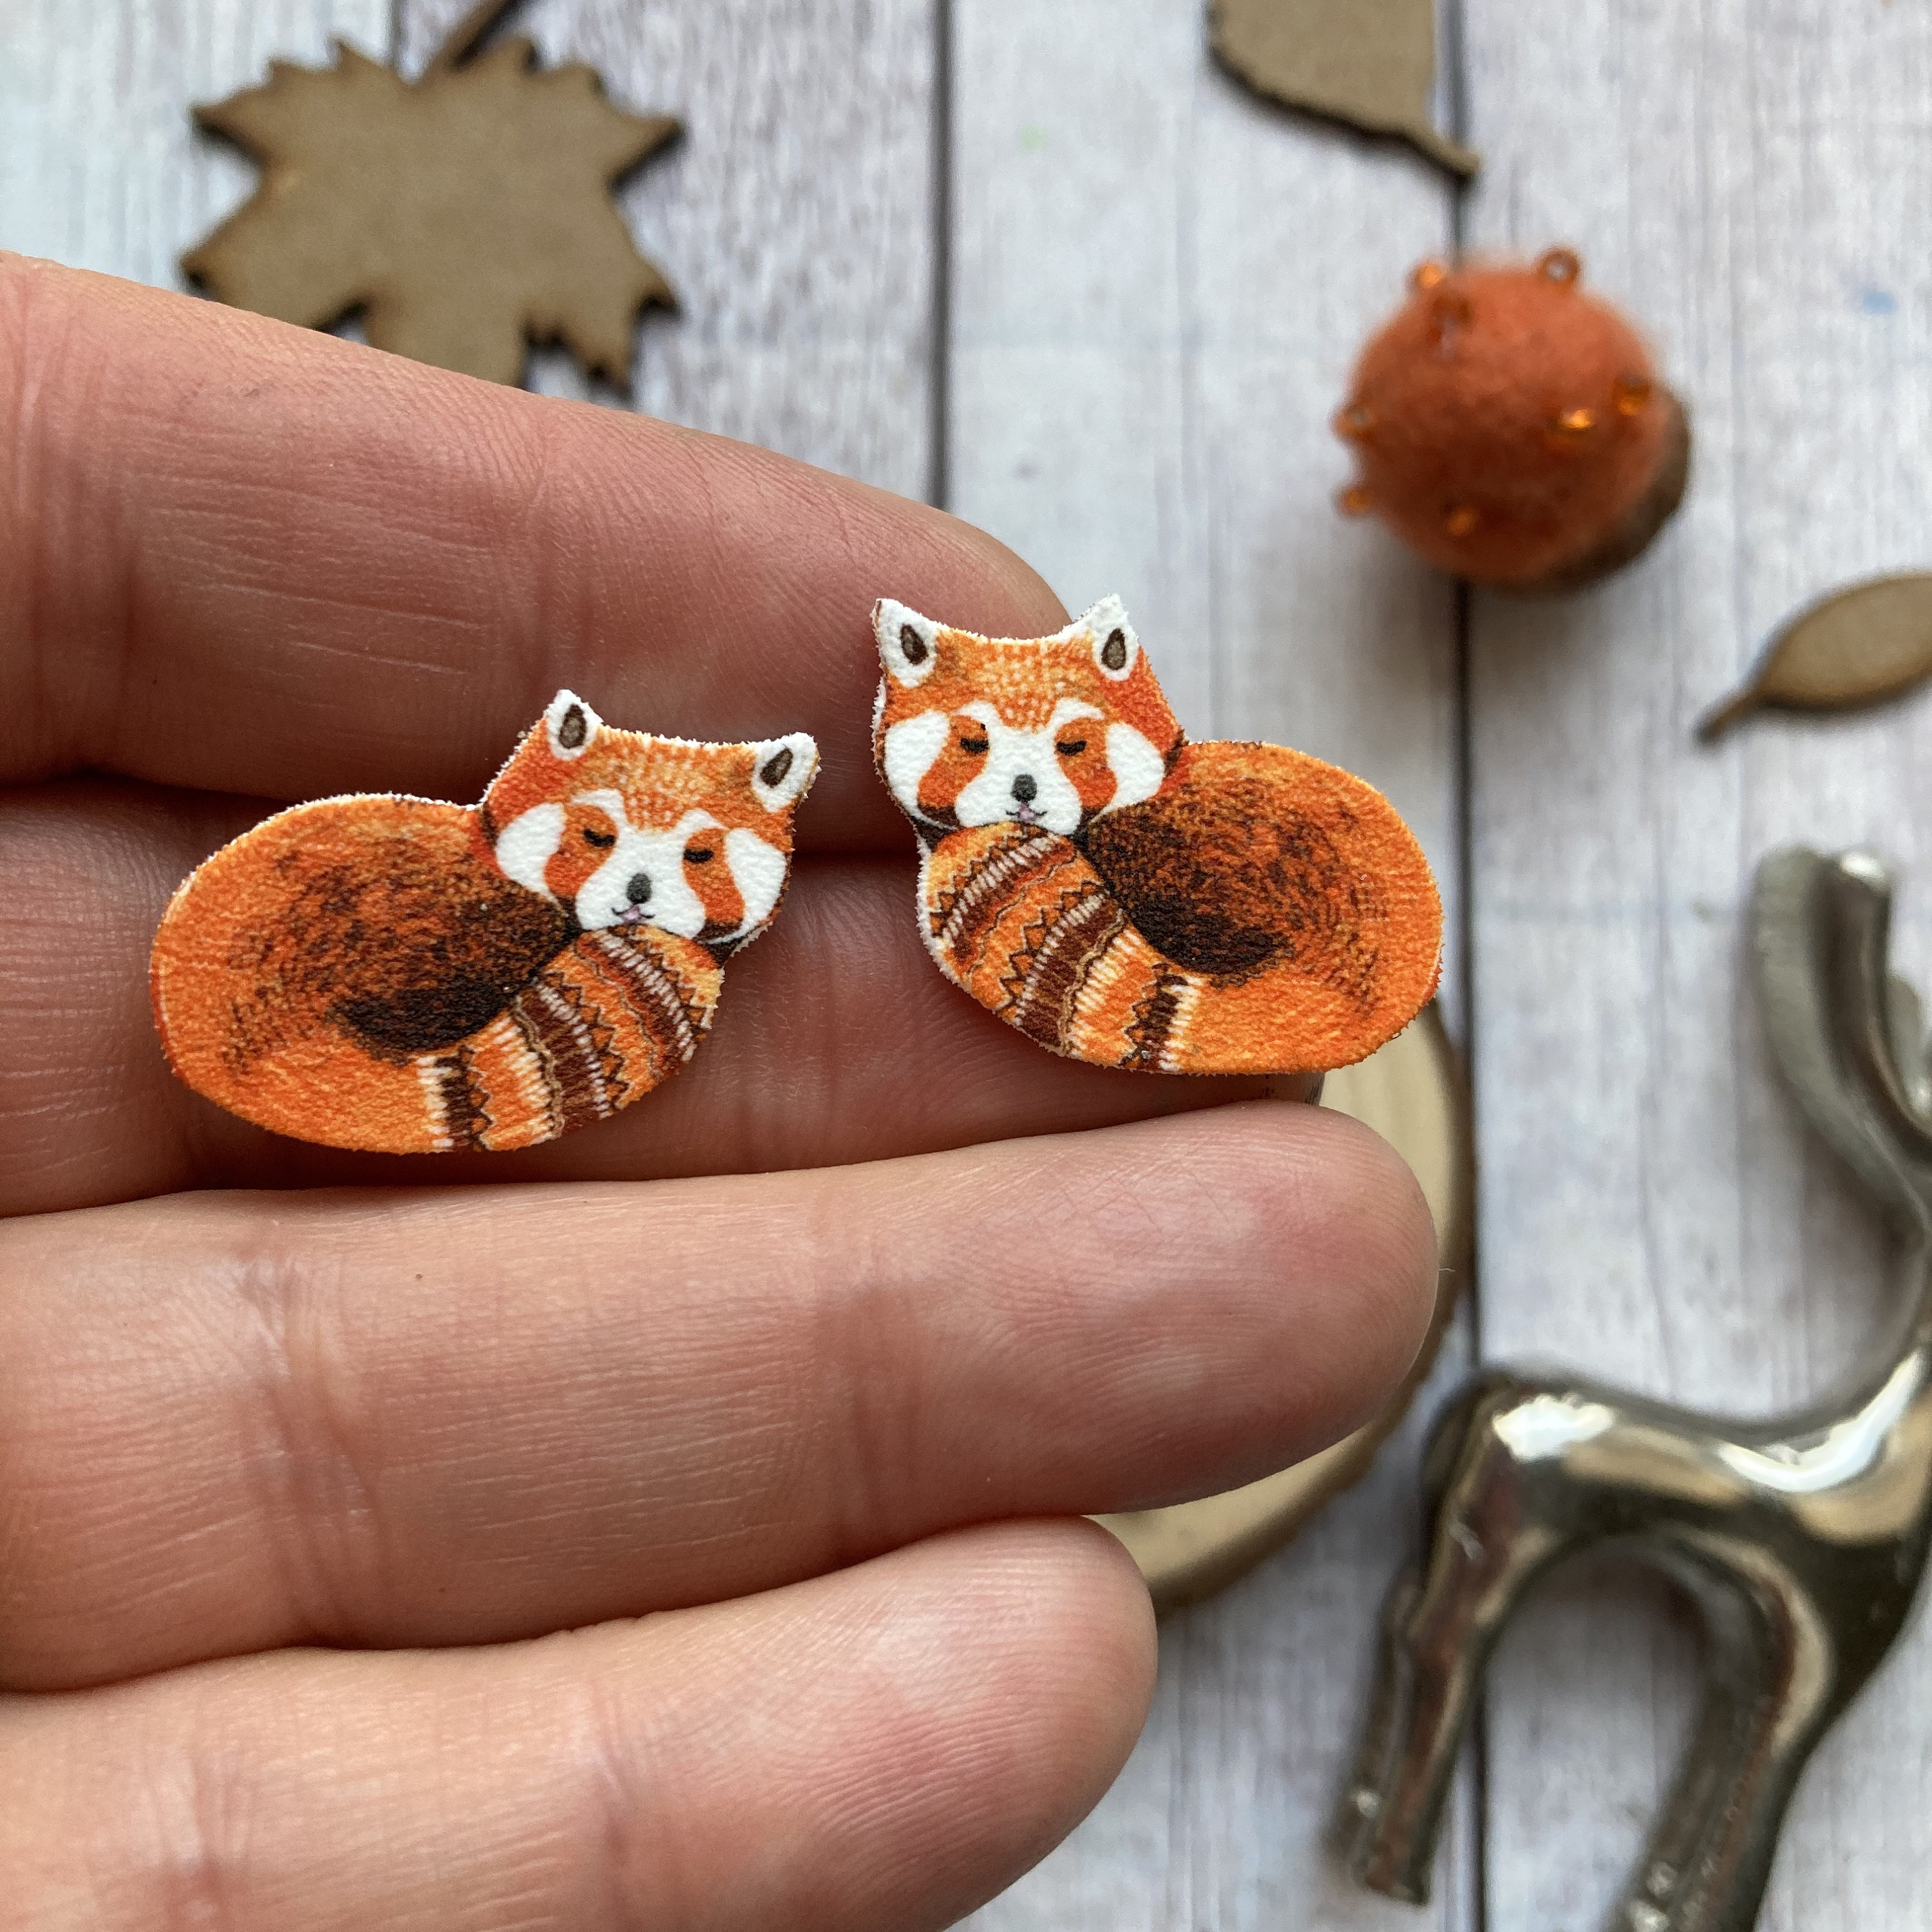 Enamel Realistic Cute Panda Animal Clip on Earrings for Women Girls Birthday Touched Gifts